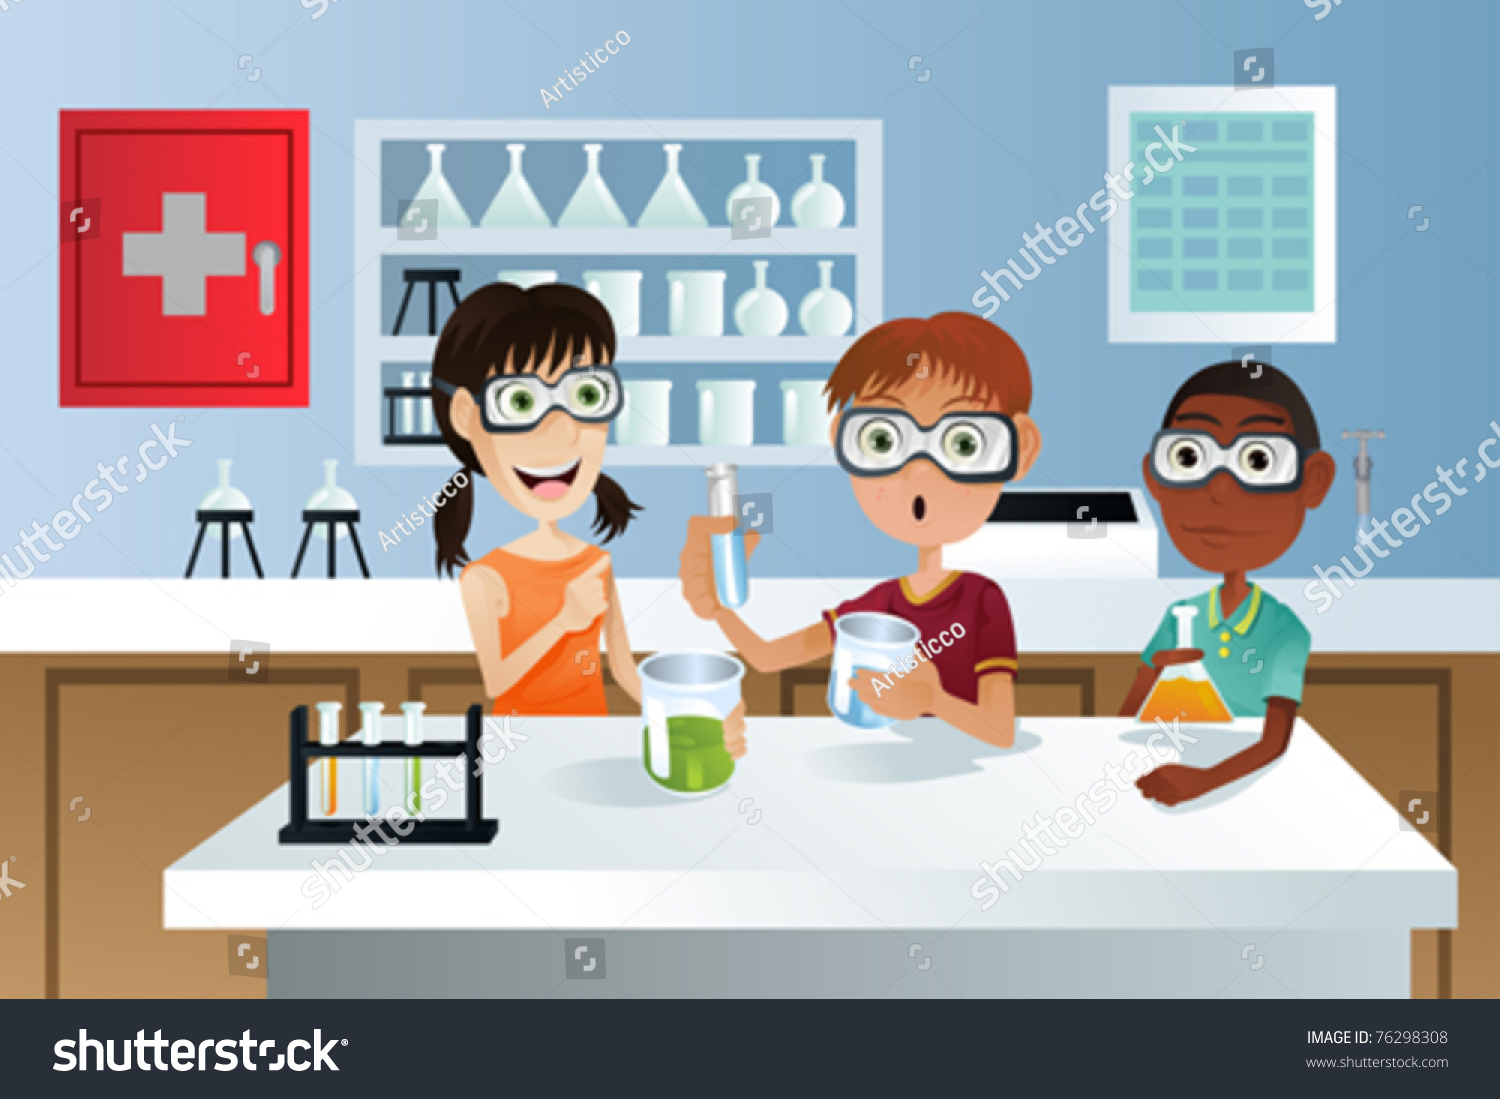 A Vector Illustration Of Students In A Science Class Working On A ...